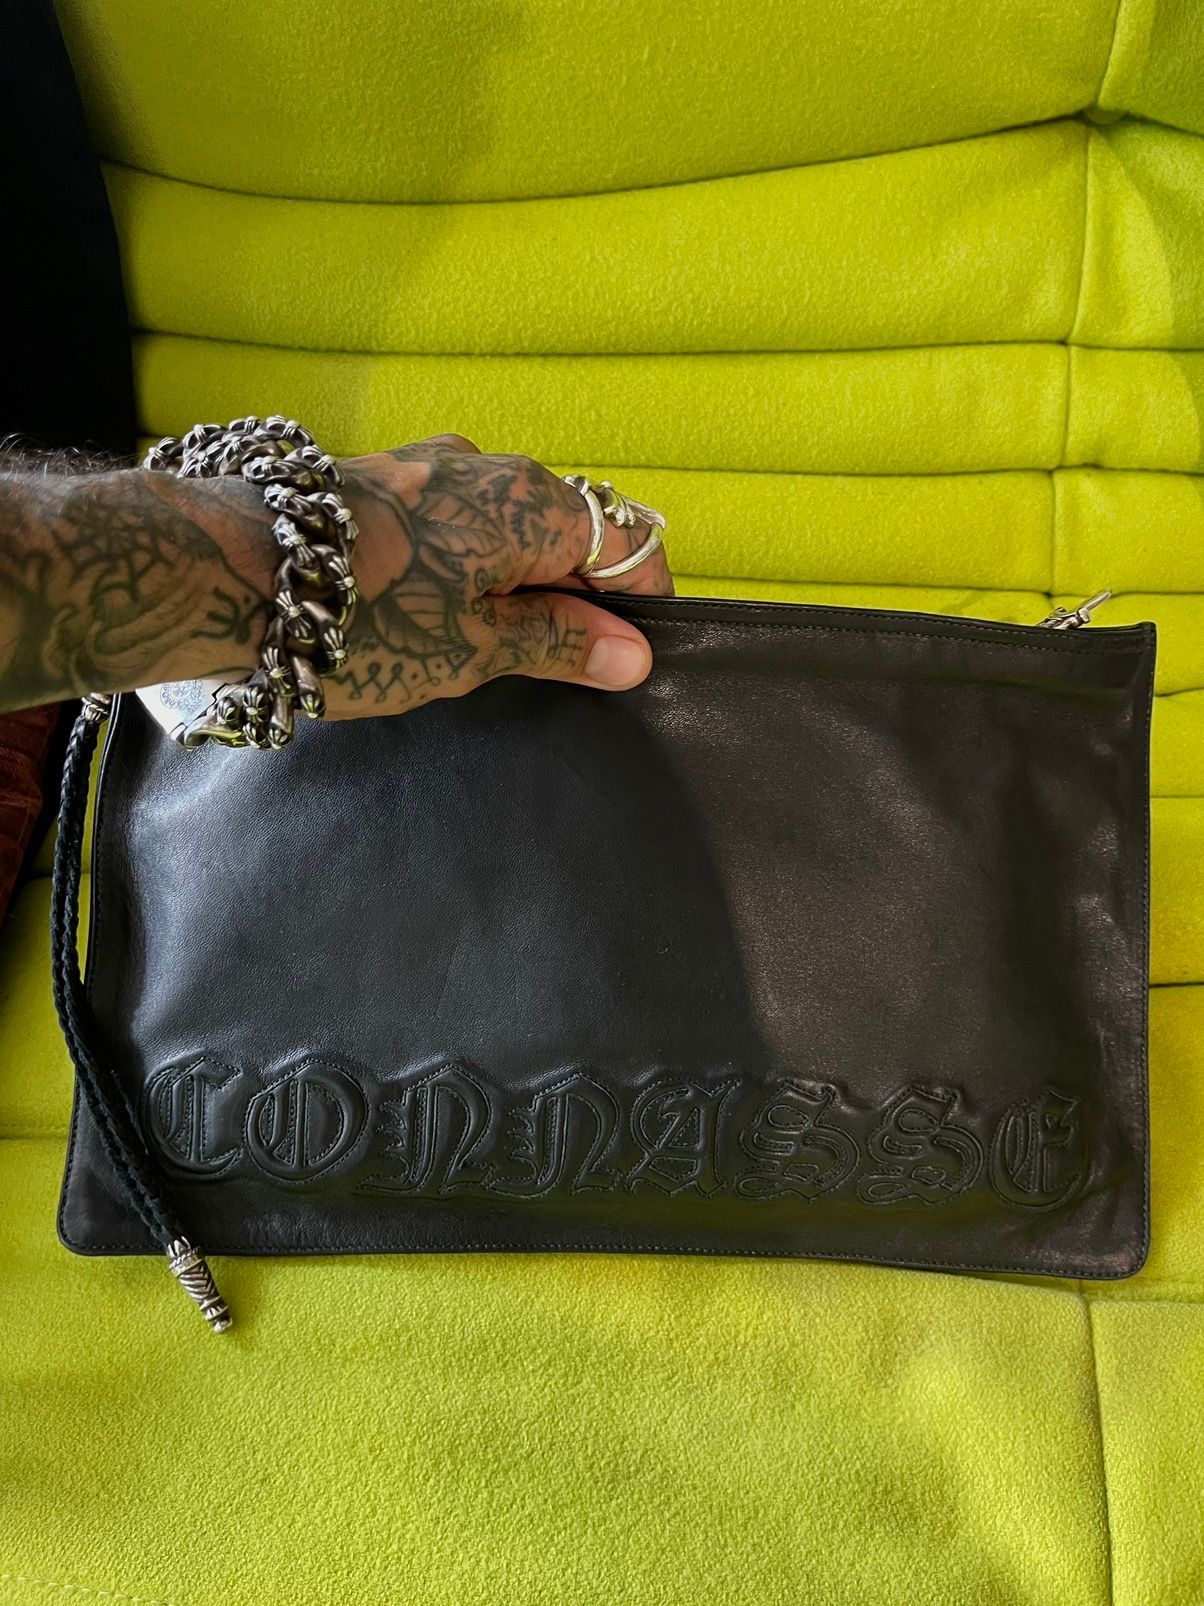 Chrome Hearts Custom French “CUNT” Spell Out Bag Leather